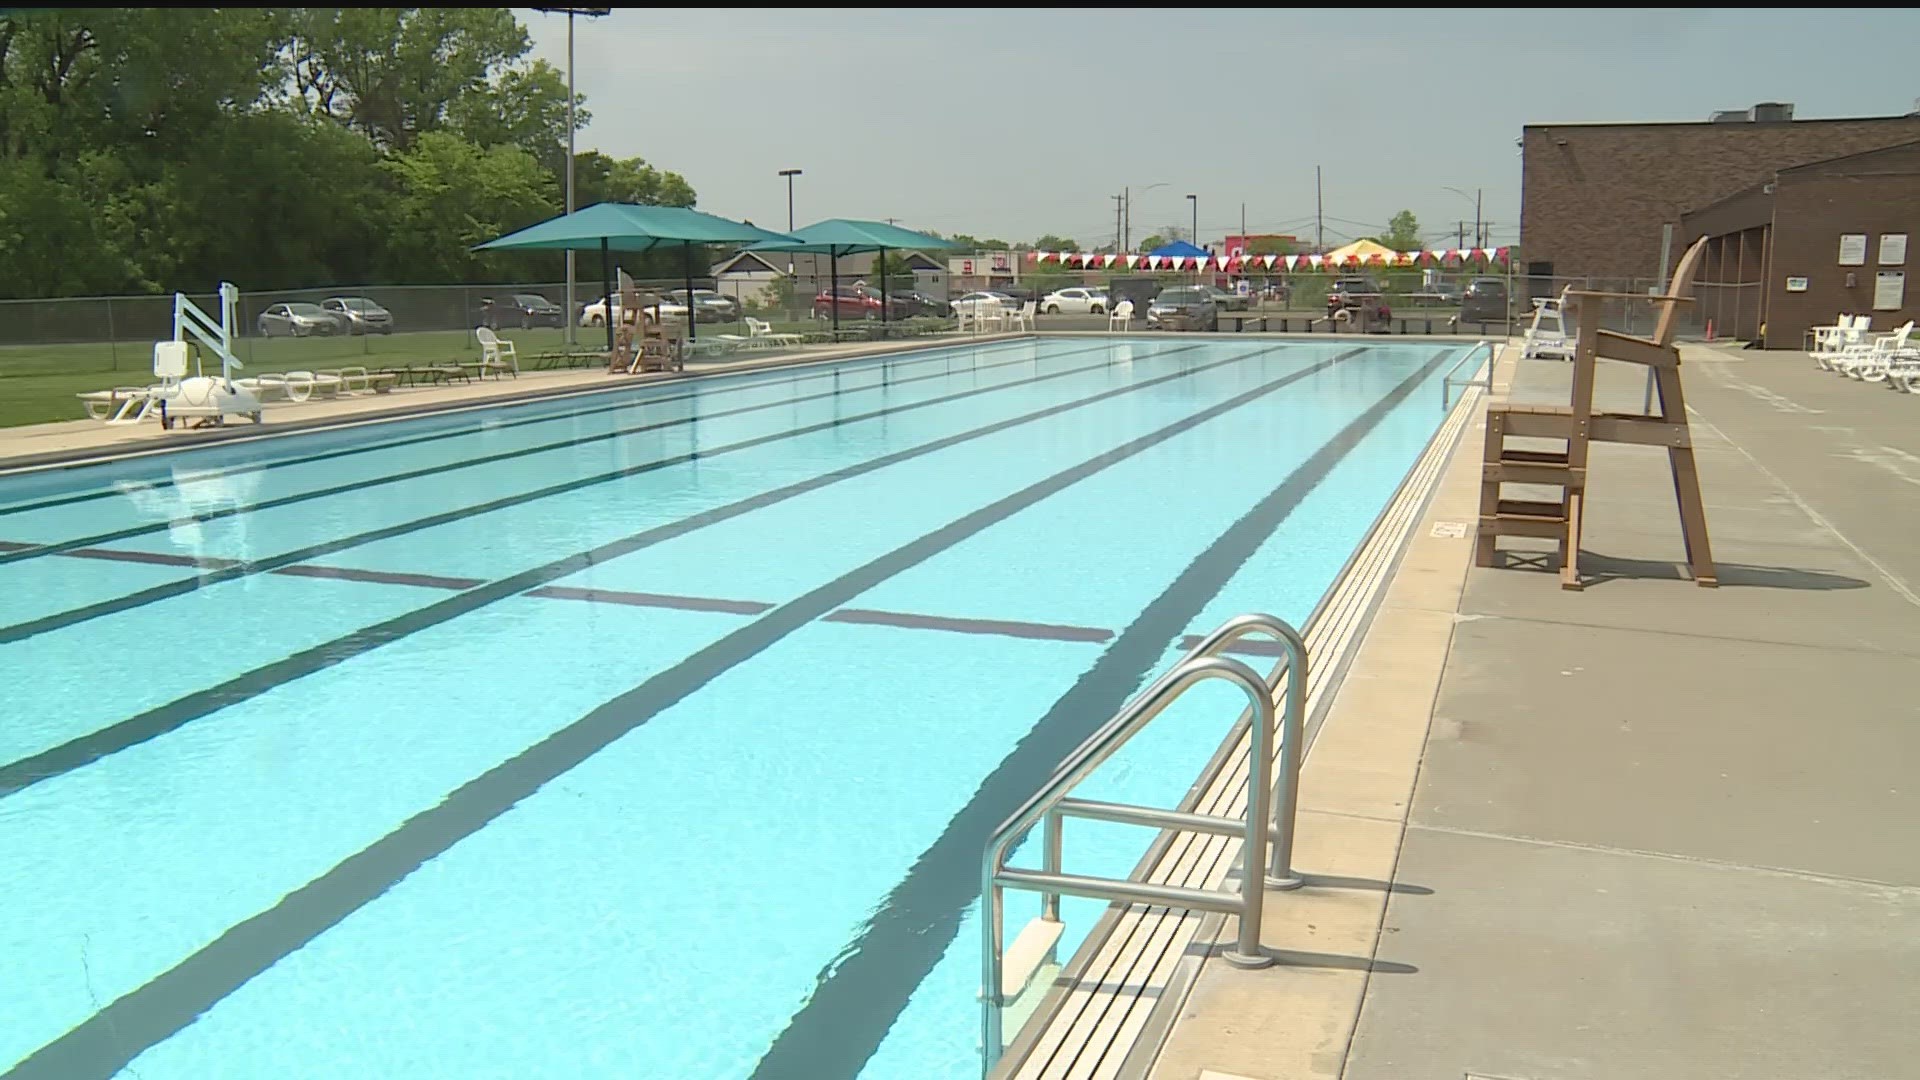 The organization is offering a $1,000 sign-on bonus for new lifeguards and a starting wage of $17.50 an hour.